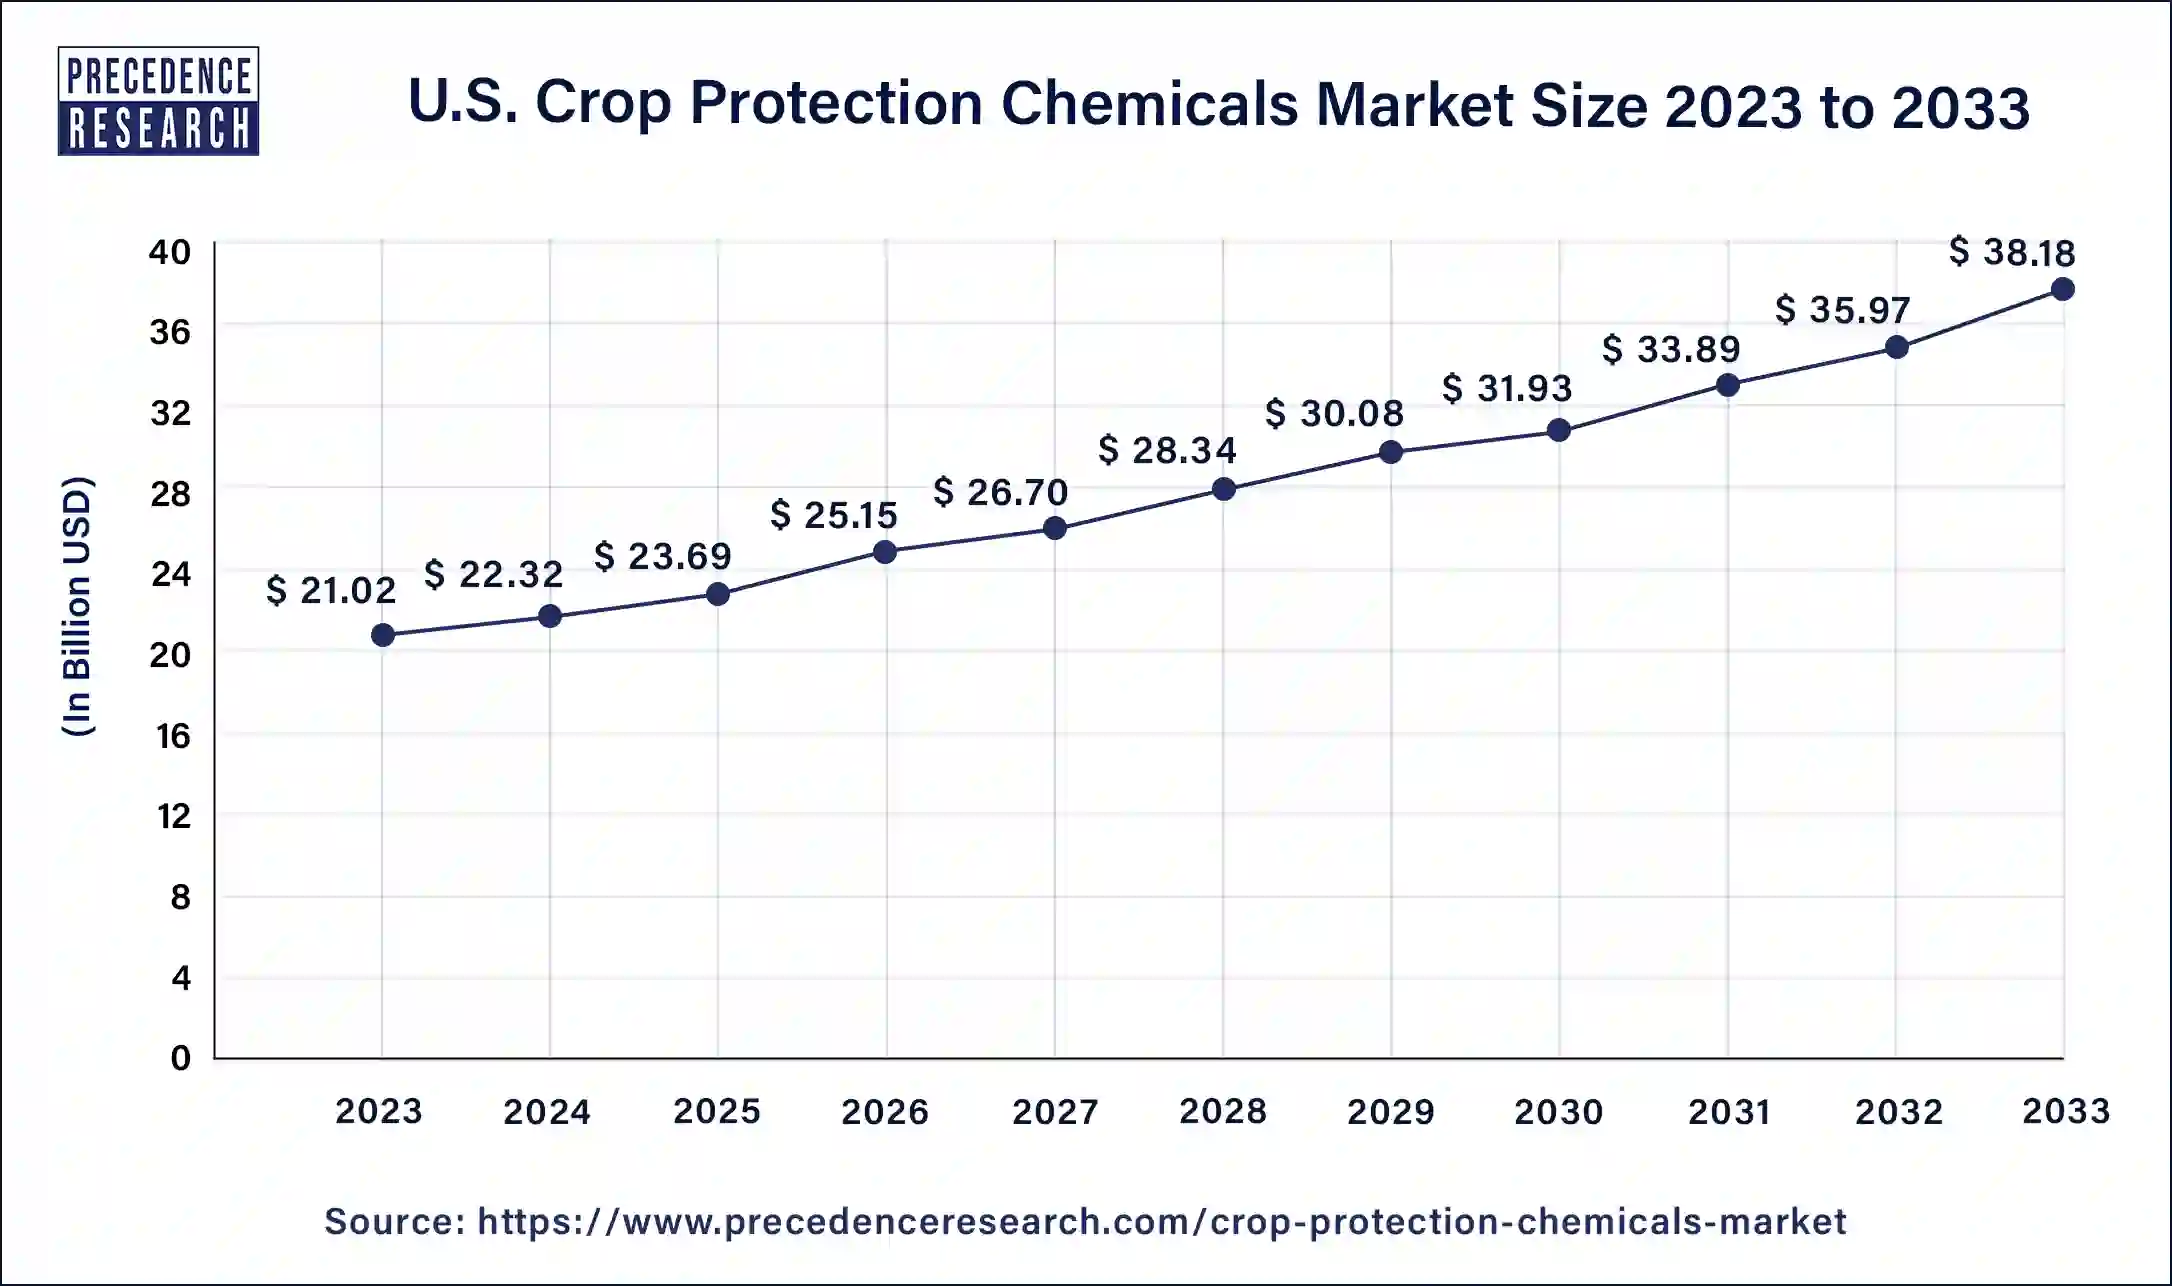 U.S. Crop Protection Chemicals Market Size 2024 to 2033